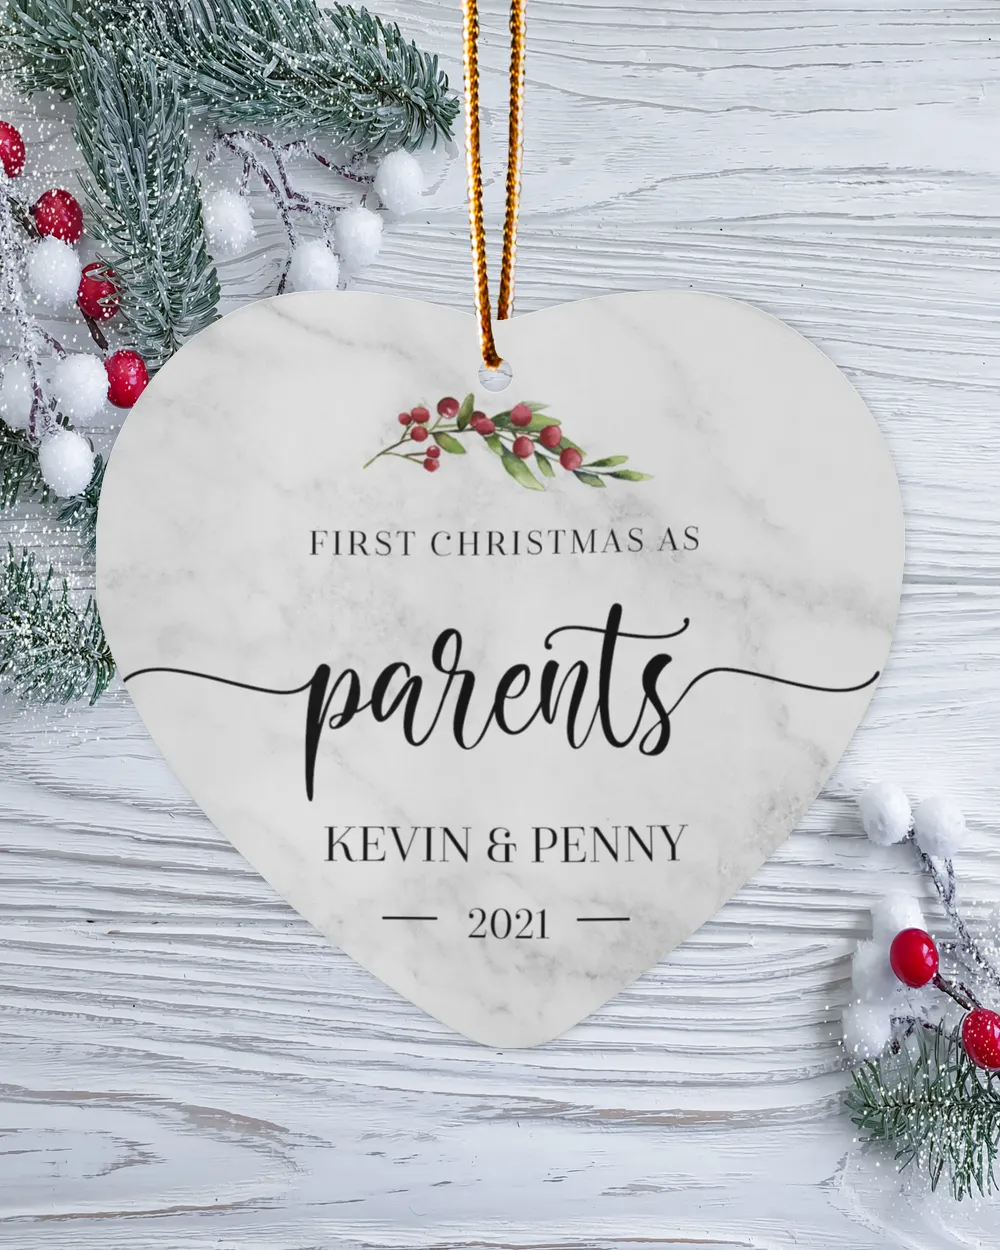 First Christmas as Parents With Name and Year | Newlywed Couple | First-time Parents | Engagement, Miss to Mrs, Couples Gift, Wedding| Christmas Ornament | Pine Tree Ornaments